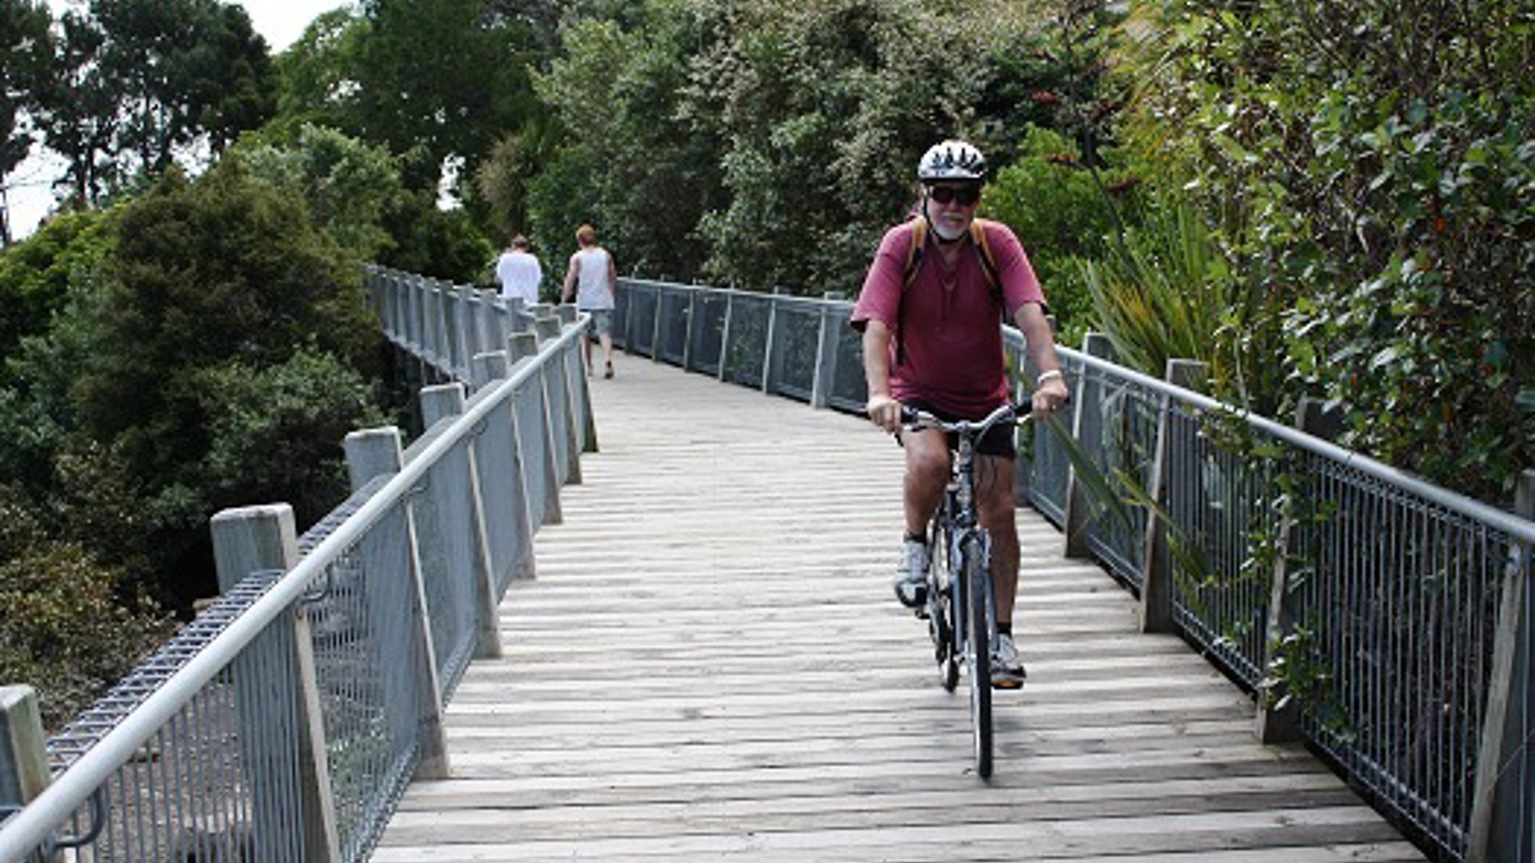 A man rides a bike across a bridge surrounded by lush bush. A couple are walking in the distance.